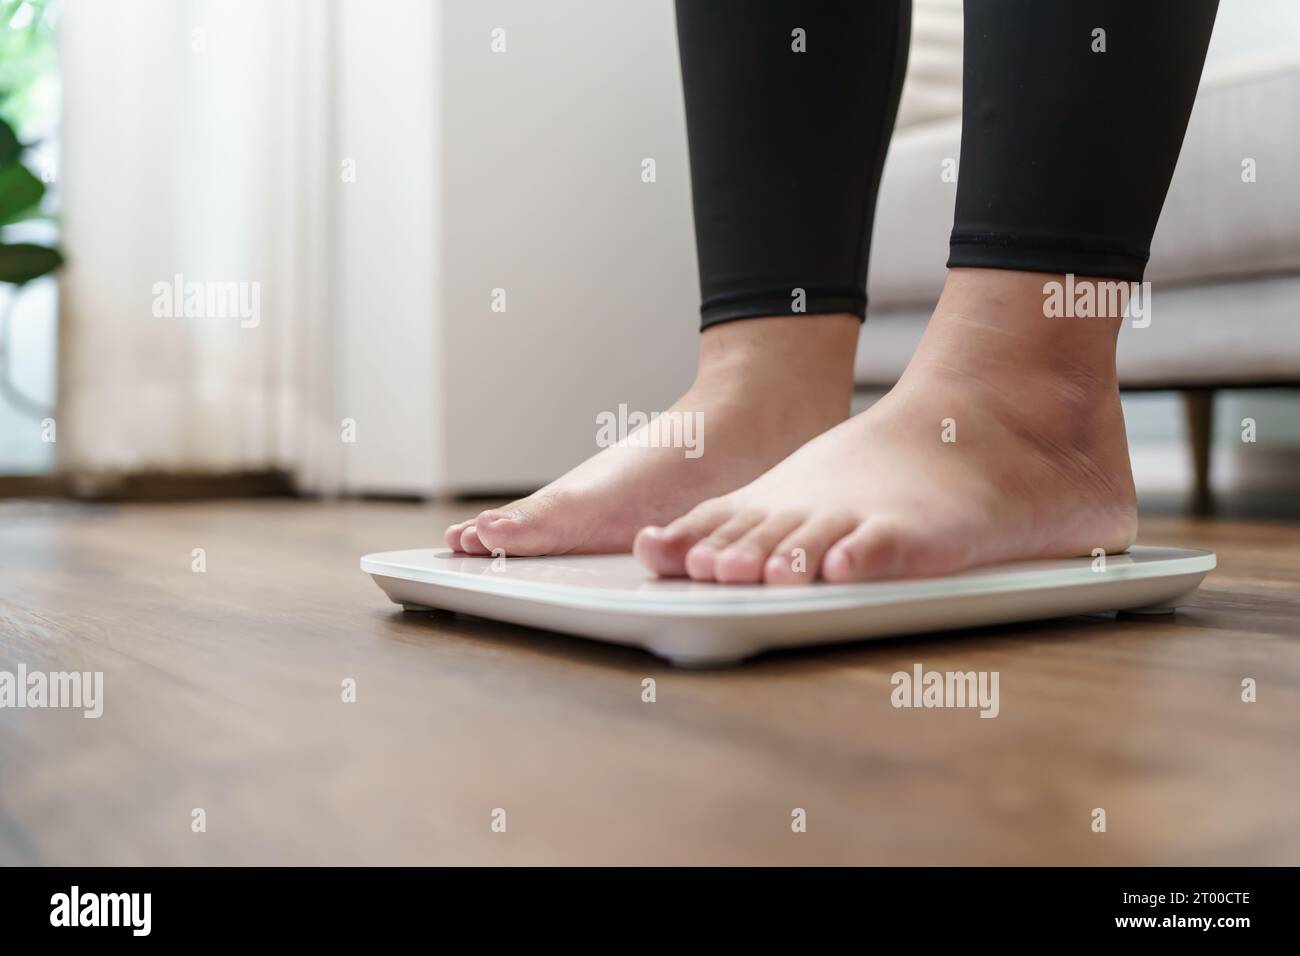 https://c8.alamy.com/comp/2T00CTE/fat-diet-and-scale-feet-standing-on-electronic-scales-for-weight-control-measurement-instrument-in-kilogram-for-a-diet-control-2T00CTE.jpg